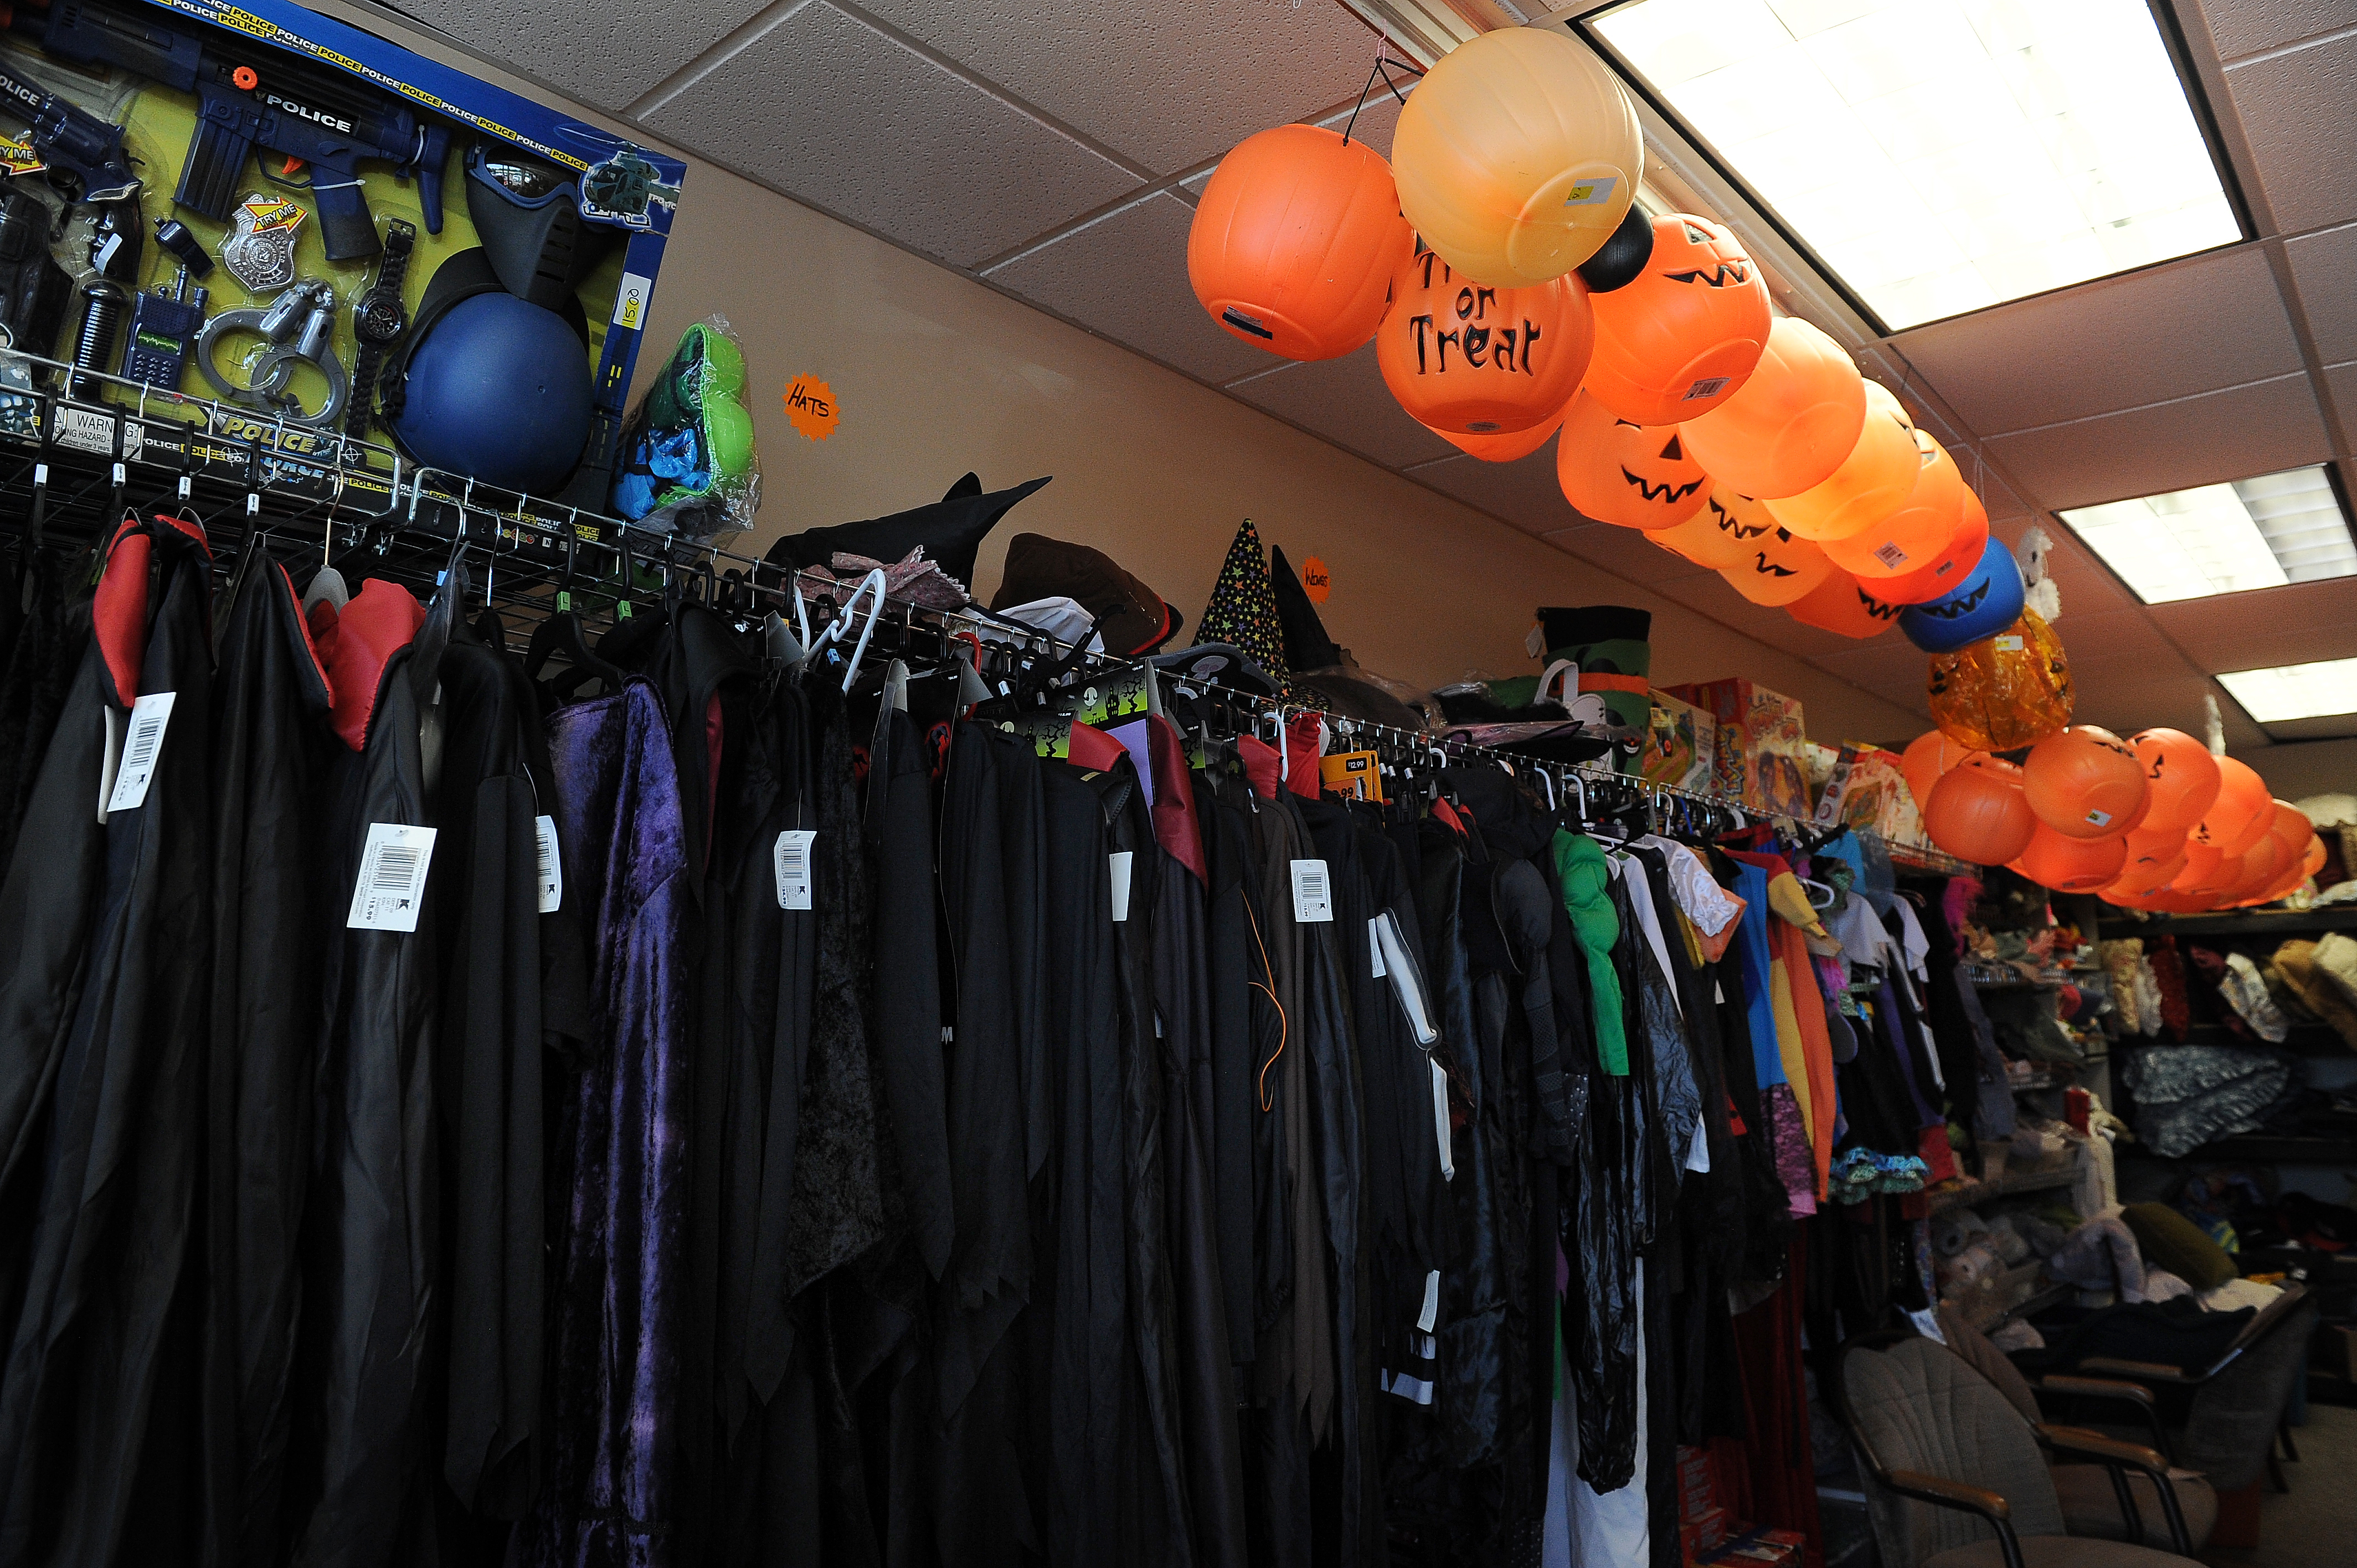 Halloween costumes and goods for sale at a thrift store in Colorado on Sept. 18, 2015. (Anya Semenoff—Denver Post/Getty Images)